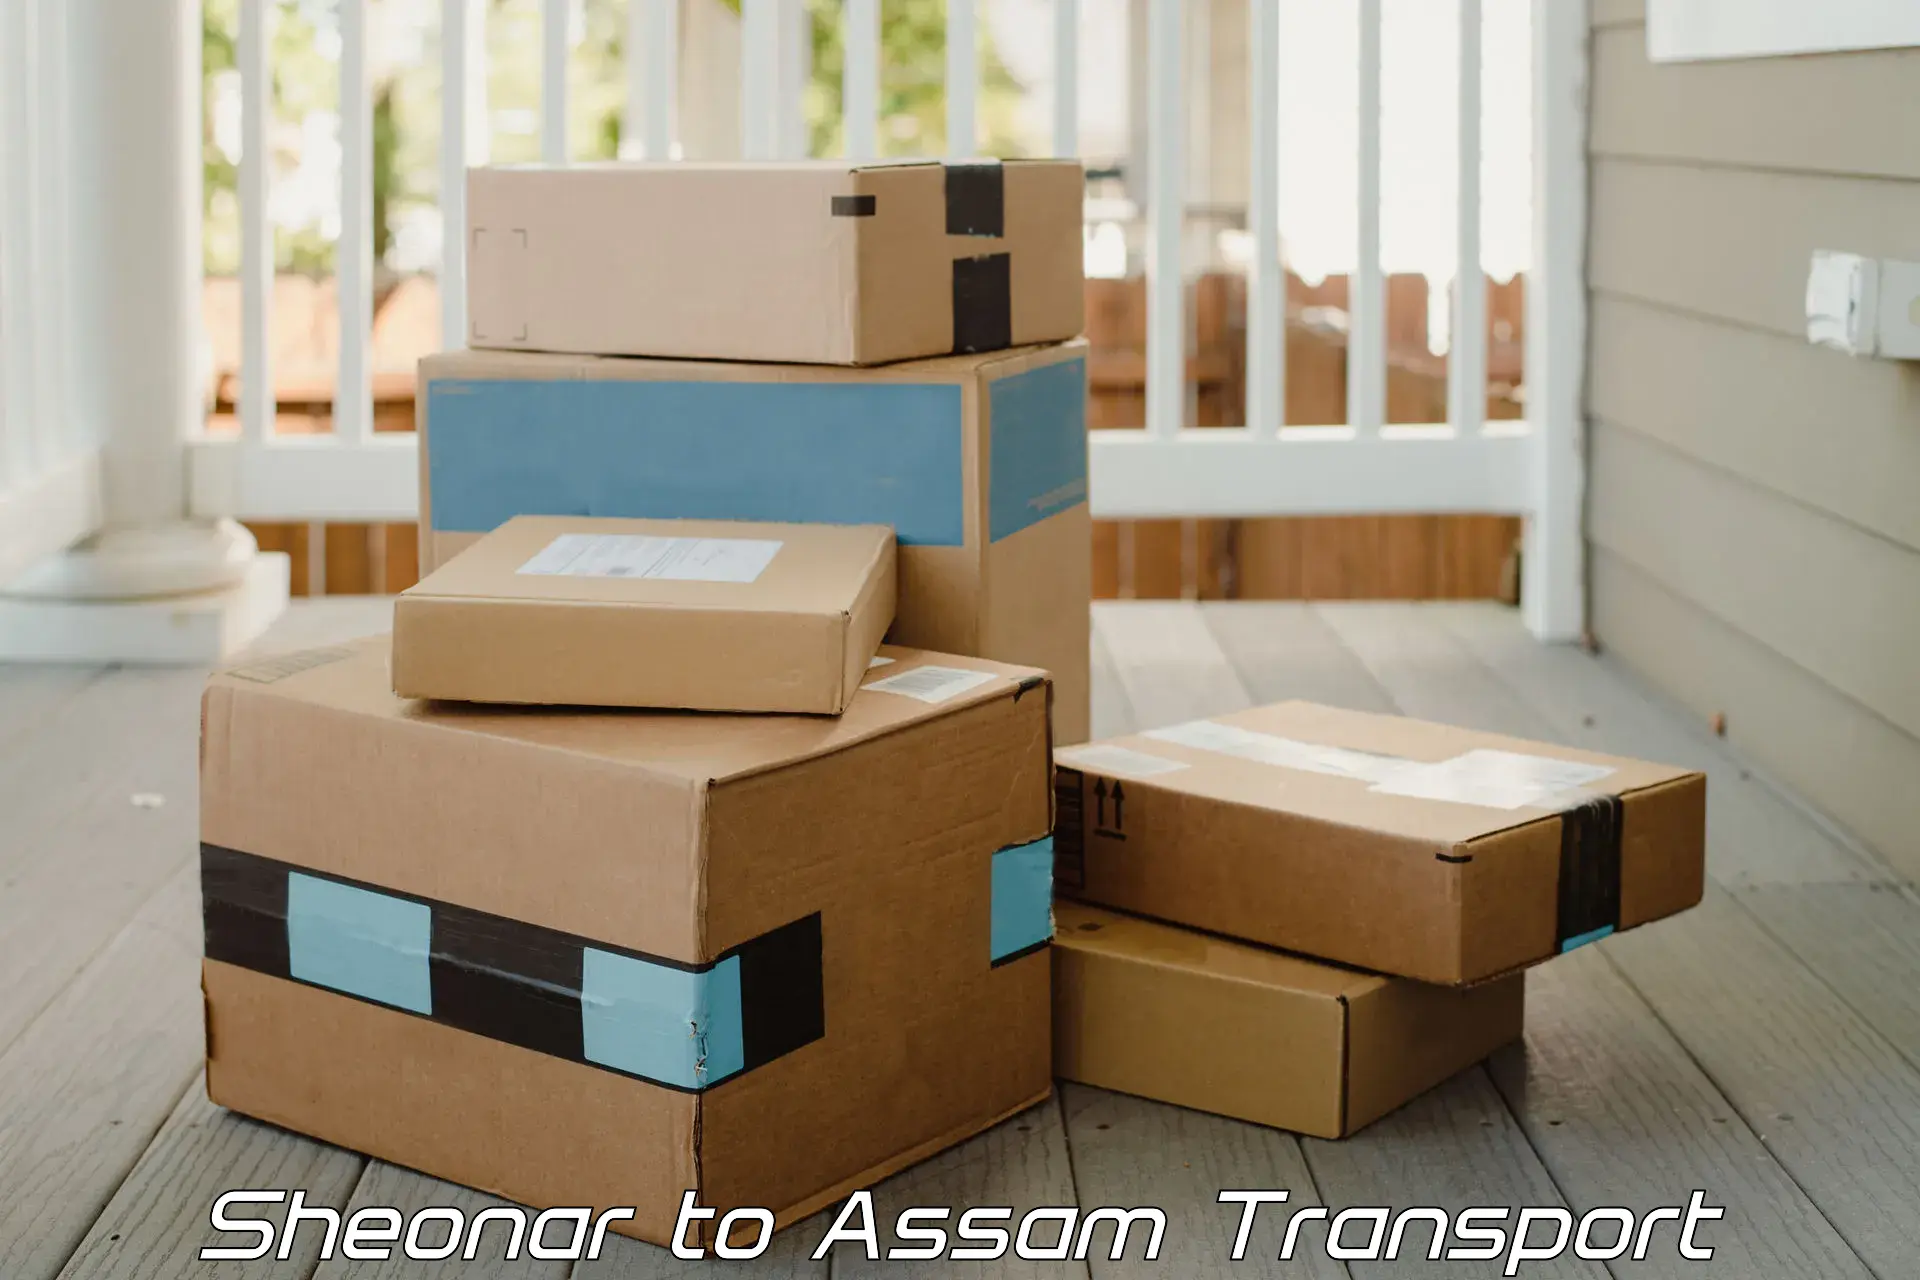 Container transport service Sheonar to Assam